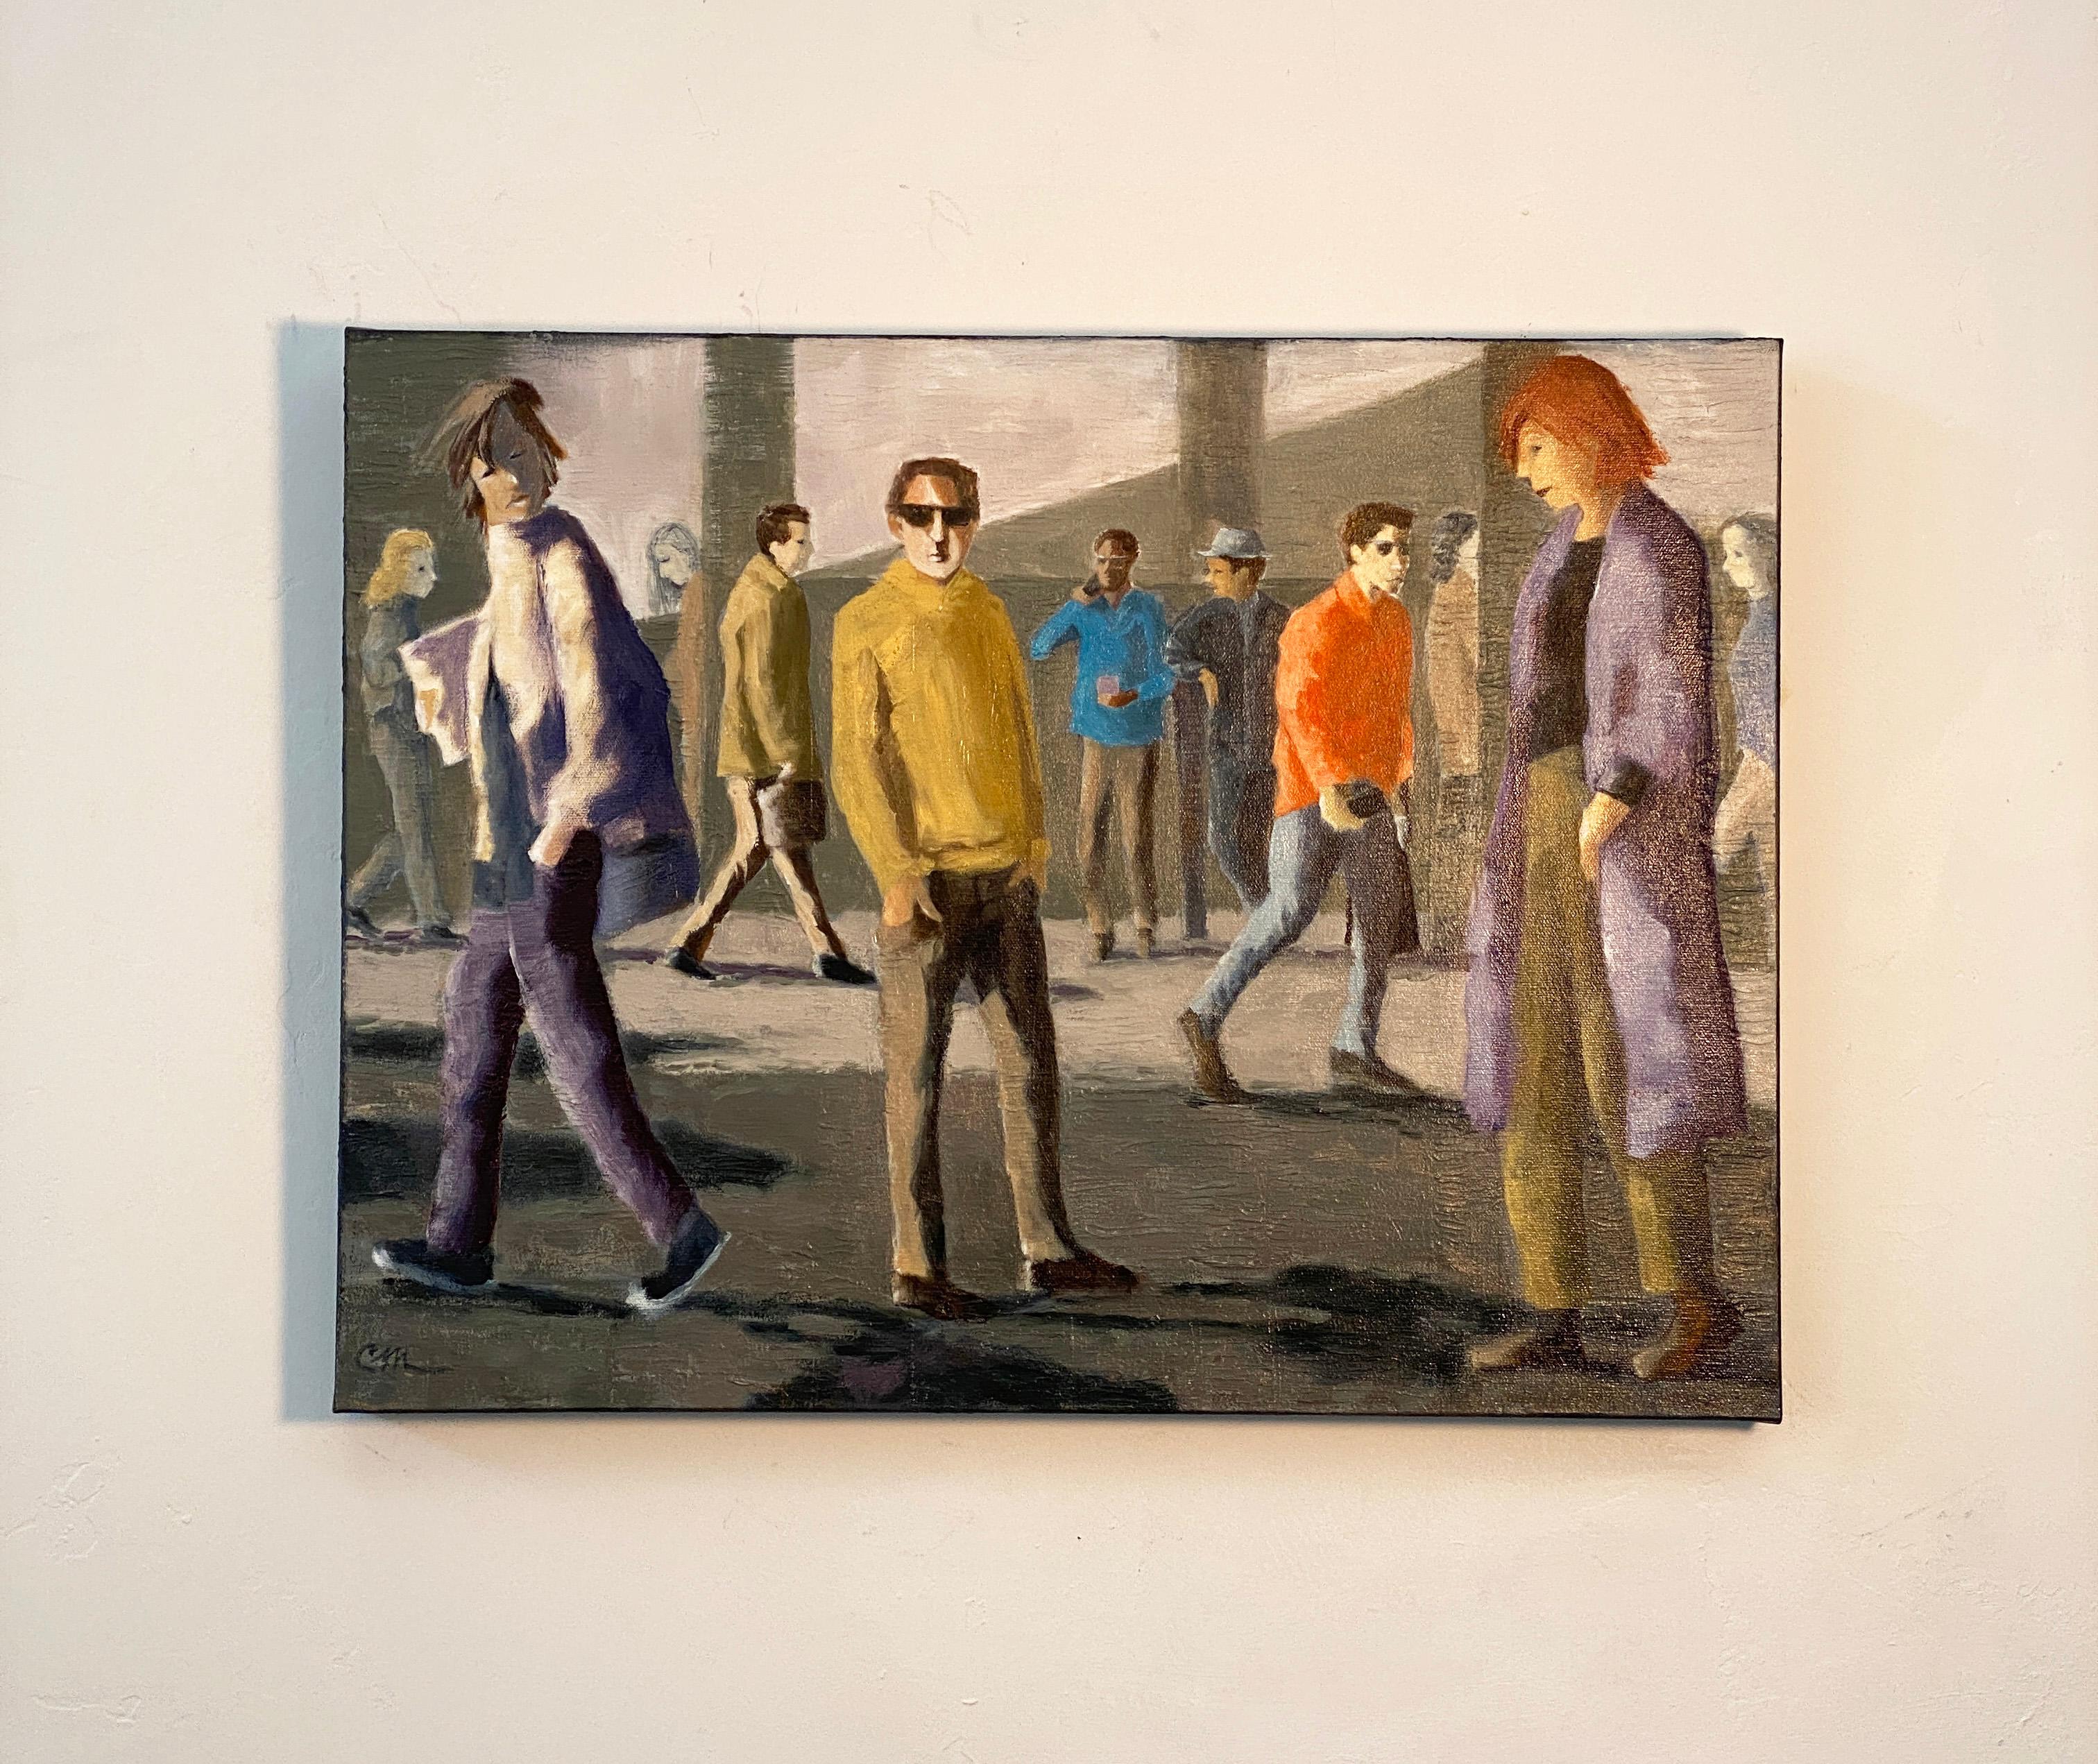 <p>Artist Comments<br />In their daily lives, individuals from diverse backgrounds briefly converge in a shared space as they progress toward a mutual destination. The scene portrays a busy subway station where individuals may have brief and